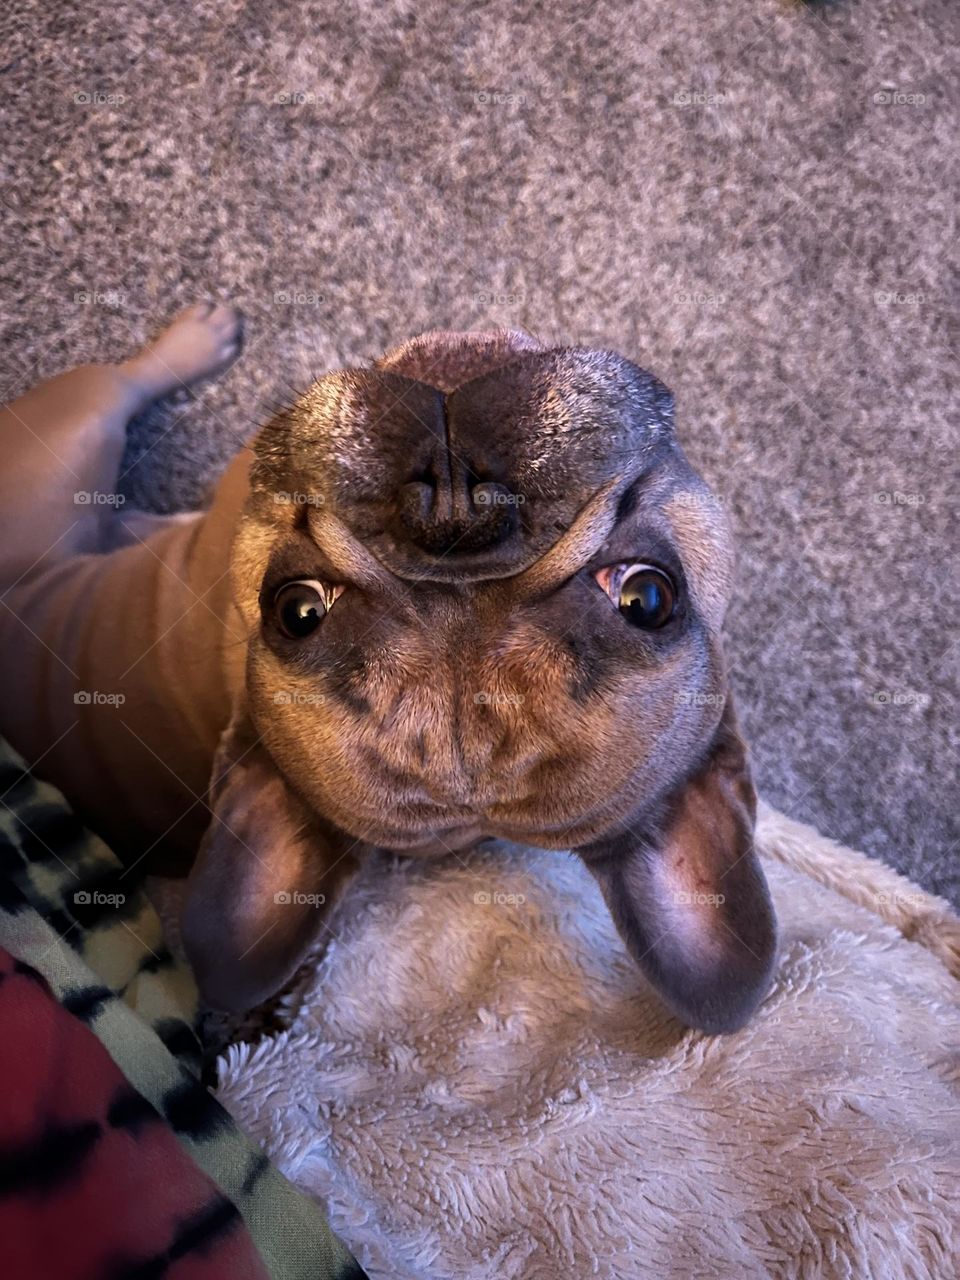 Upside down blue fawn French Bulldog being cute and loving with puppy dog eyes. 